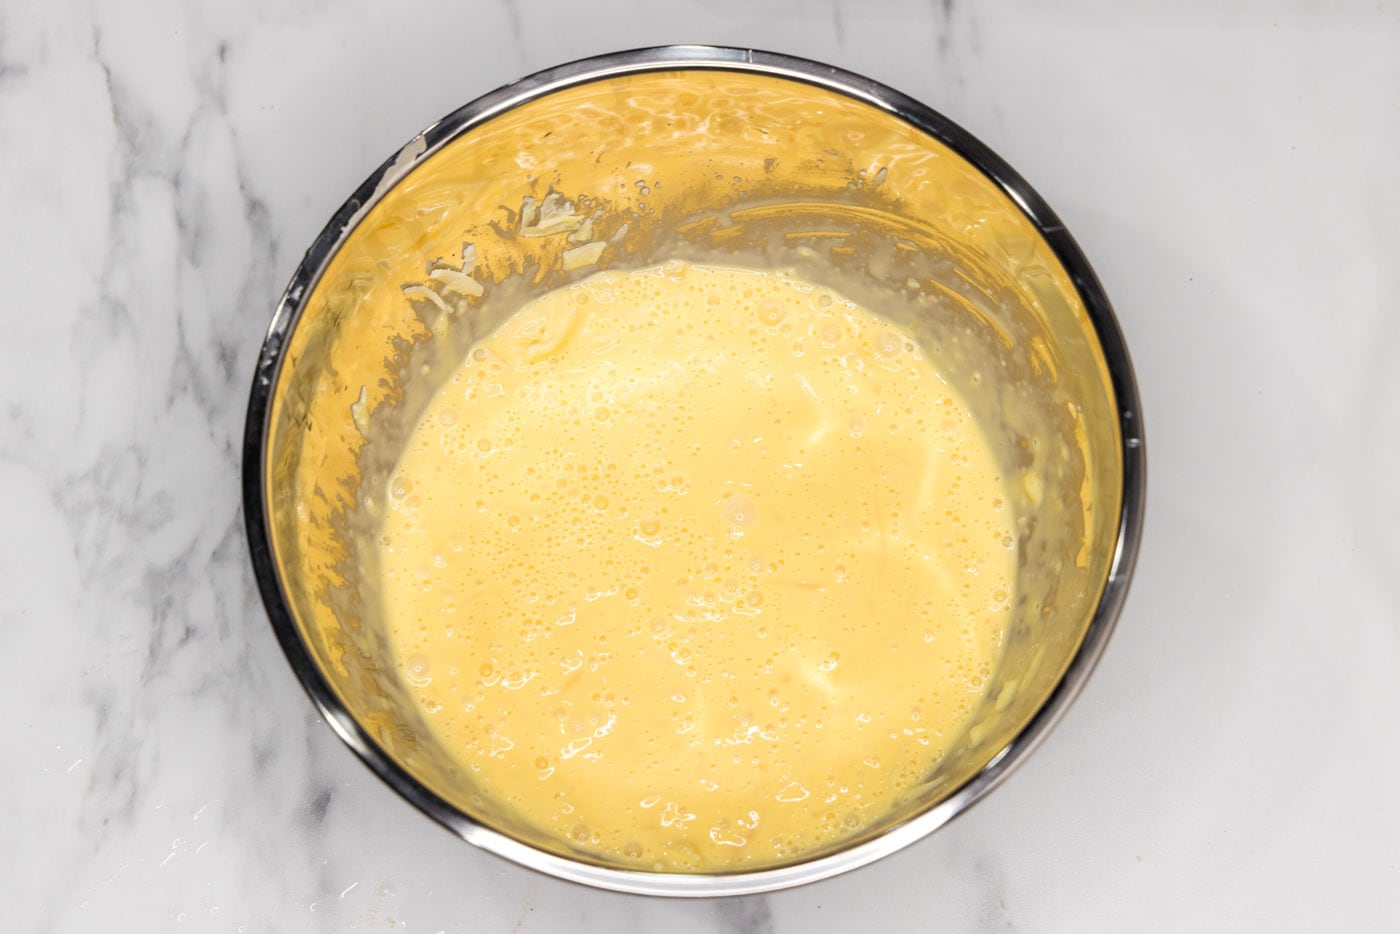 whipped egg, mustard, and heavy cream mixture in a bowl